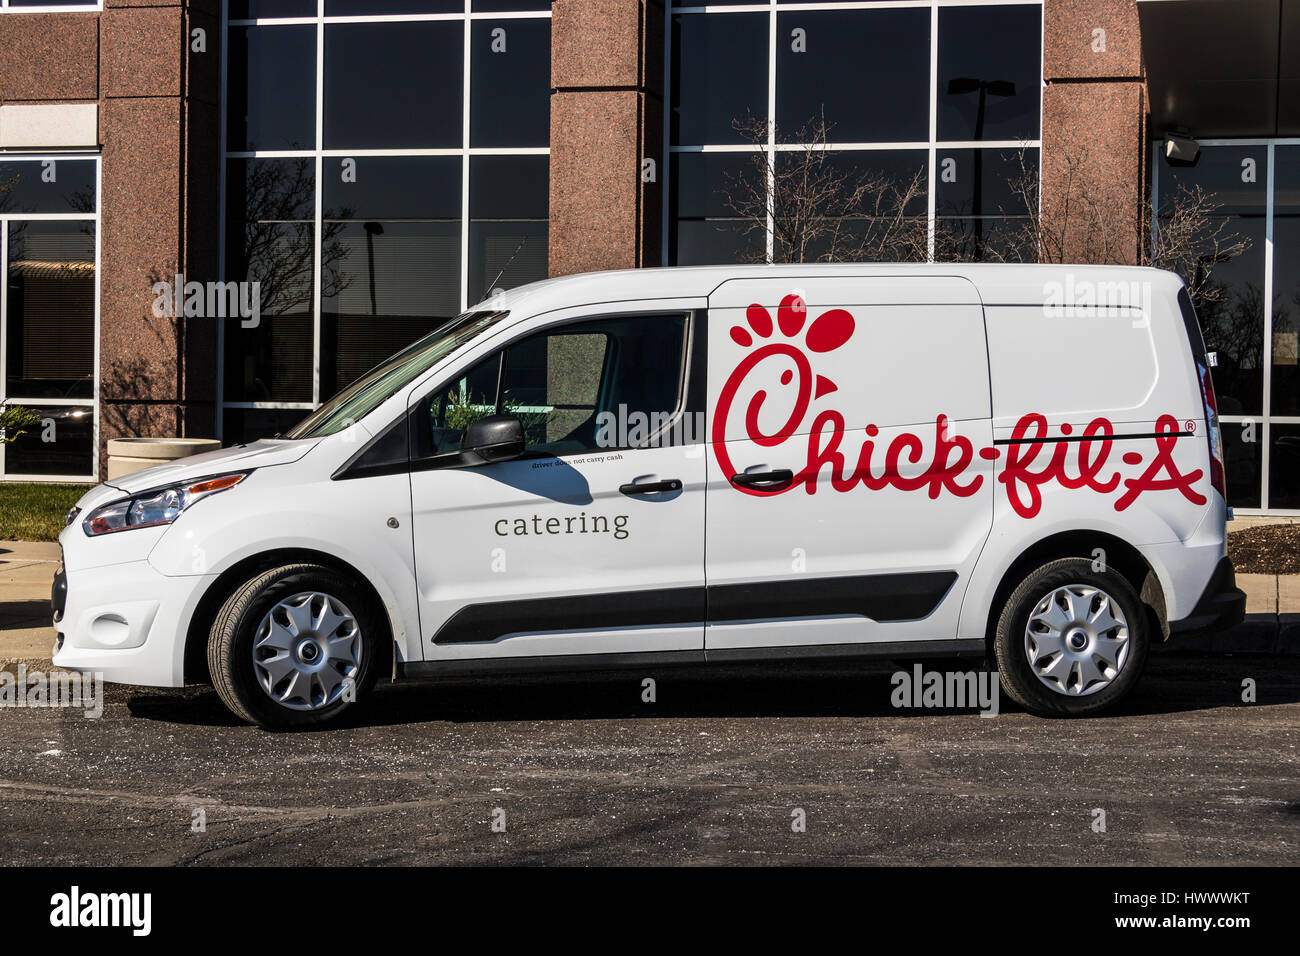 Indianapolis - Circa March 2017: Chick-fil-A Retail Fast Food Catering Vehicle. Chick-fil-A Restaurants are Closed on Sundays VI Stock Photo